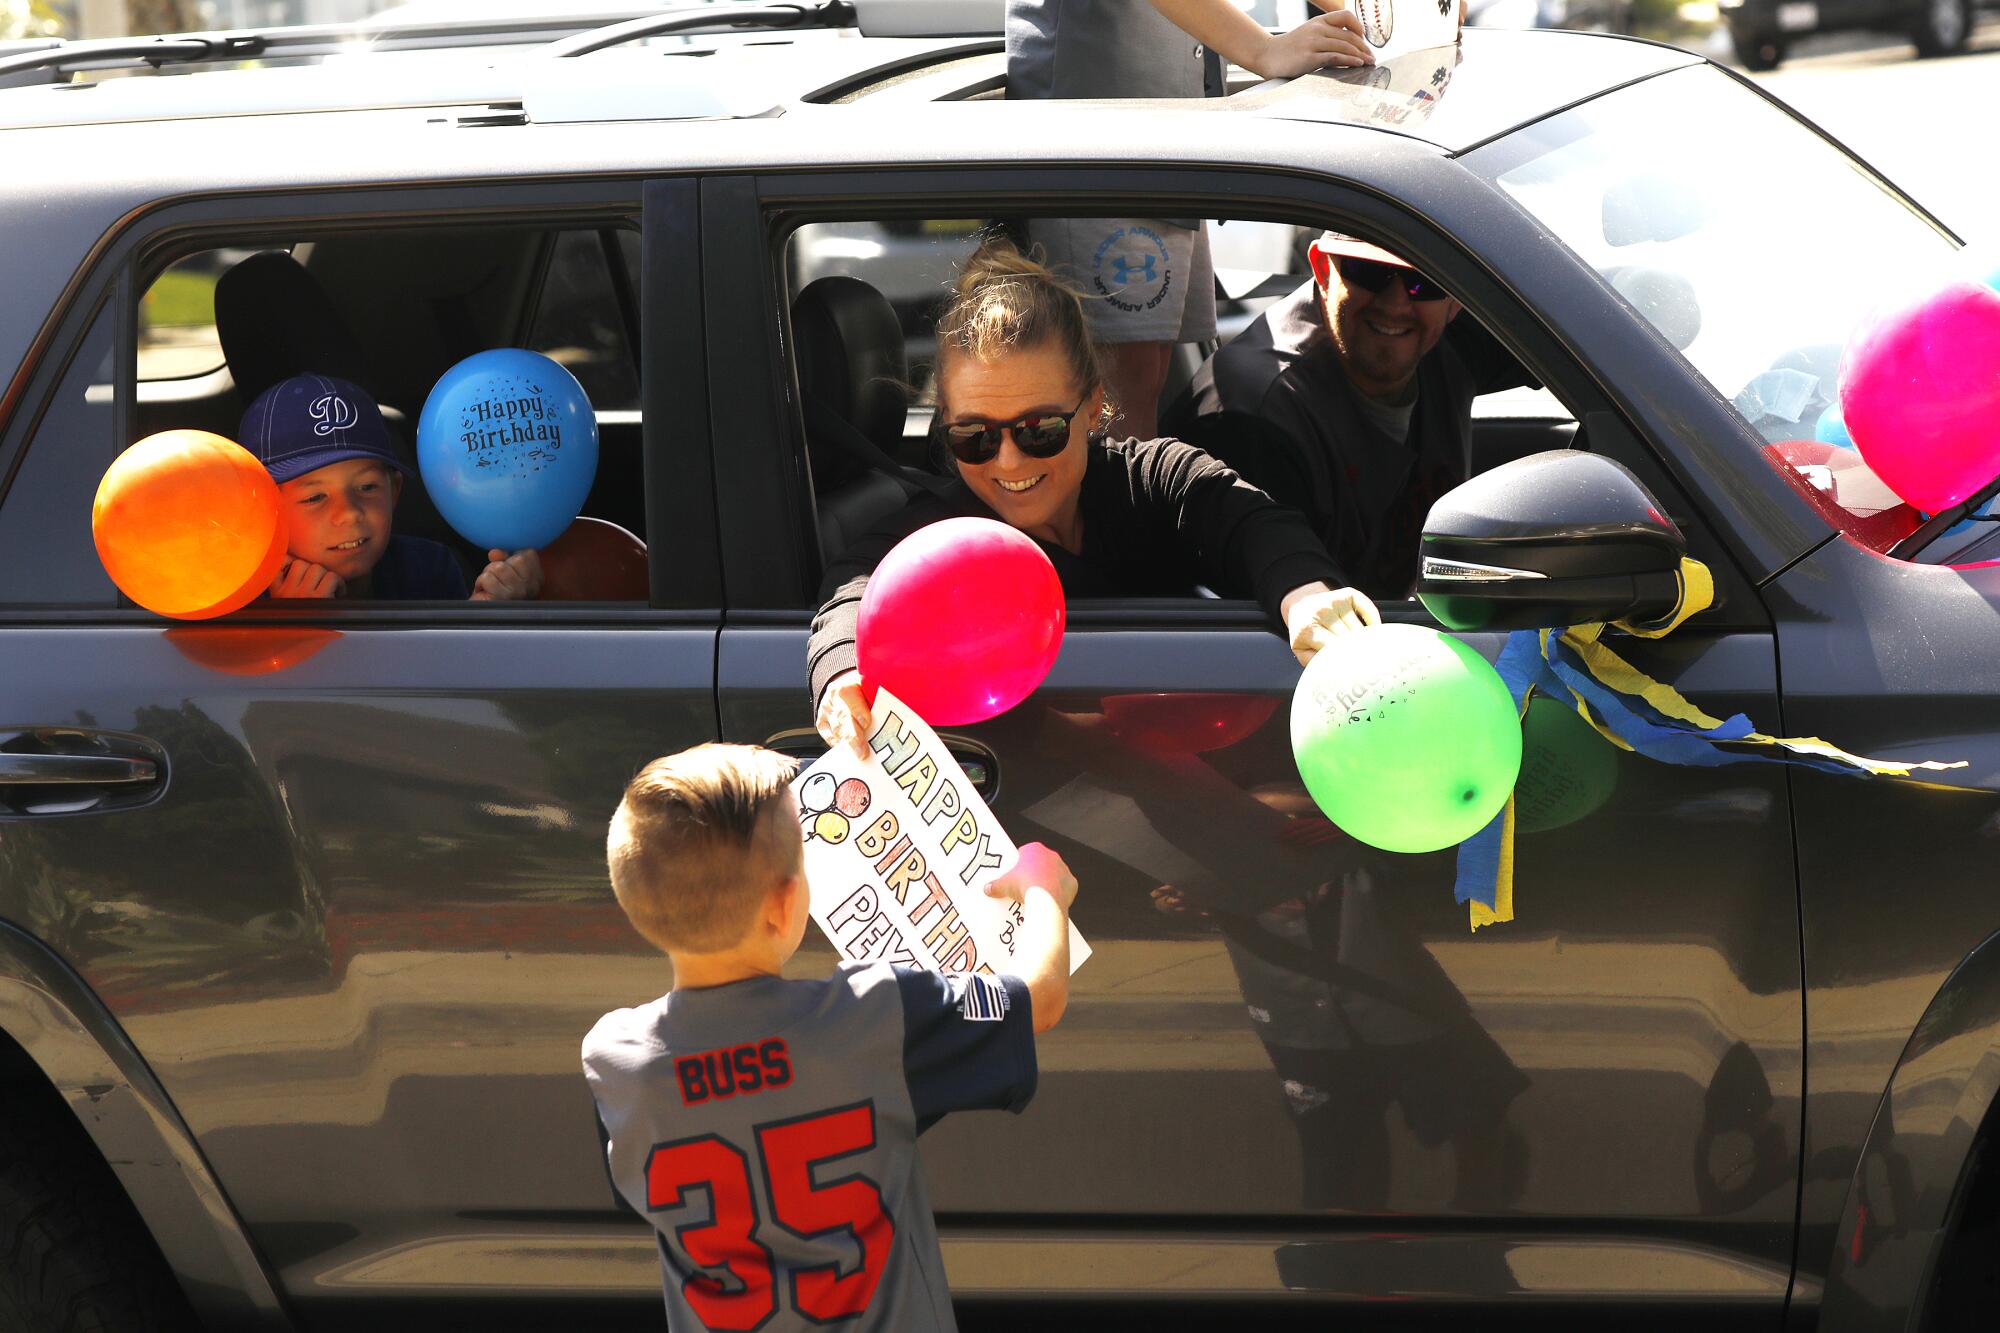 Michelle Buben hands a sign to Peyton to mark his 8th birthday.